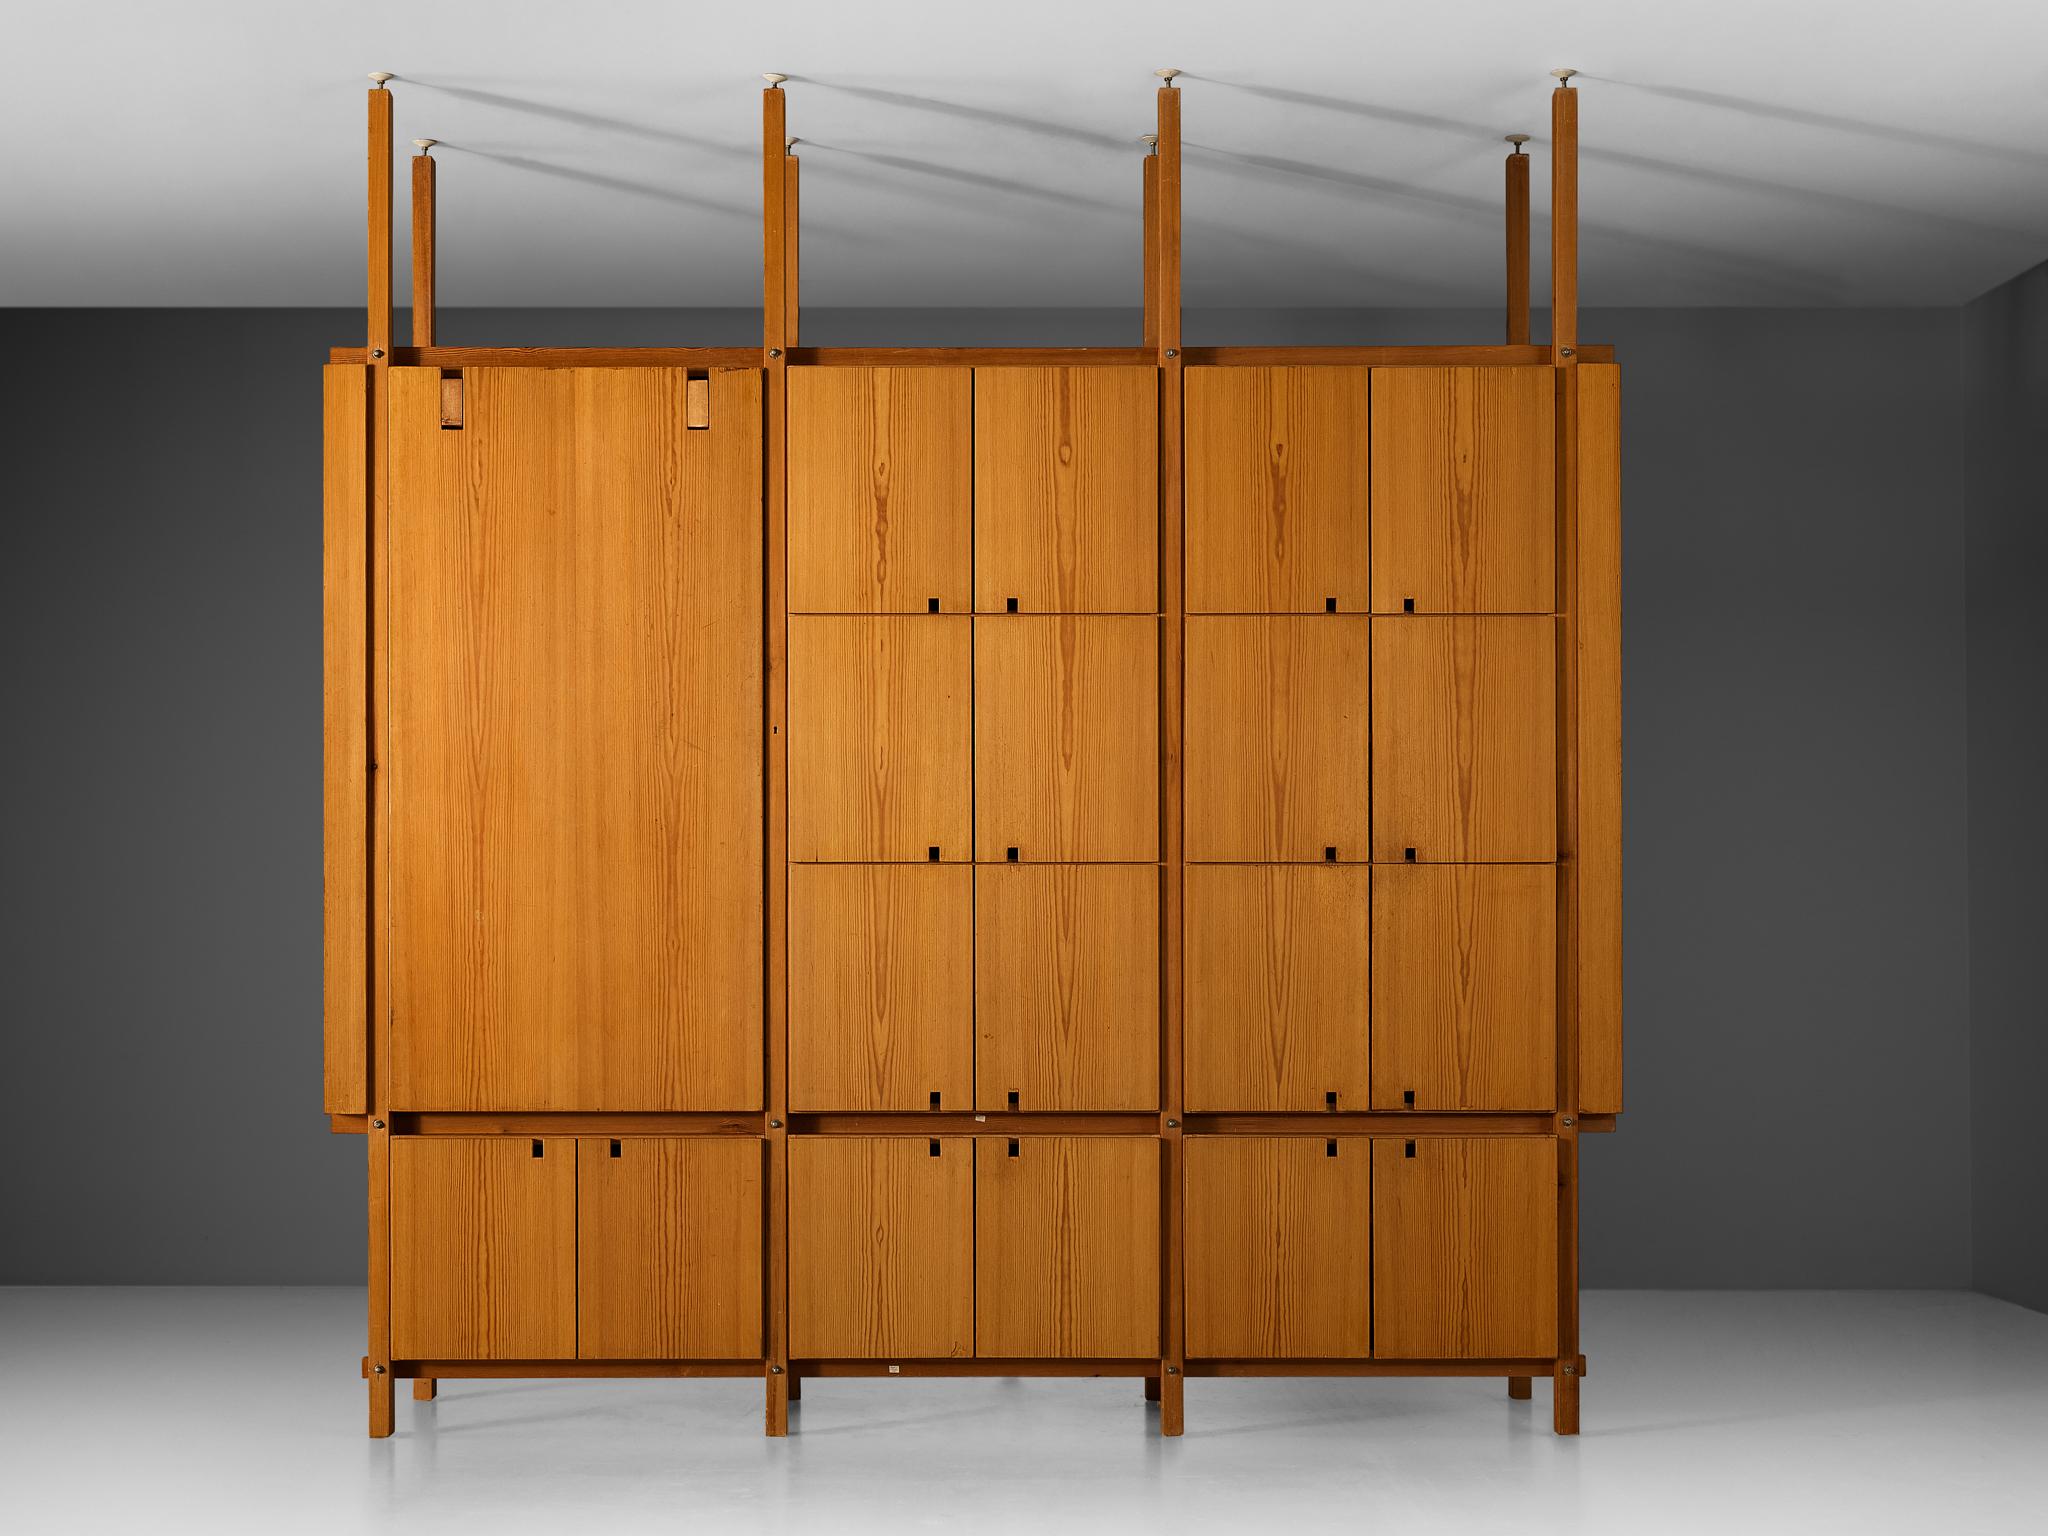 Post-Modern Monumental Wall Unit or Room Divider In Pine  For Sale